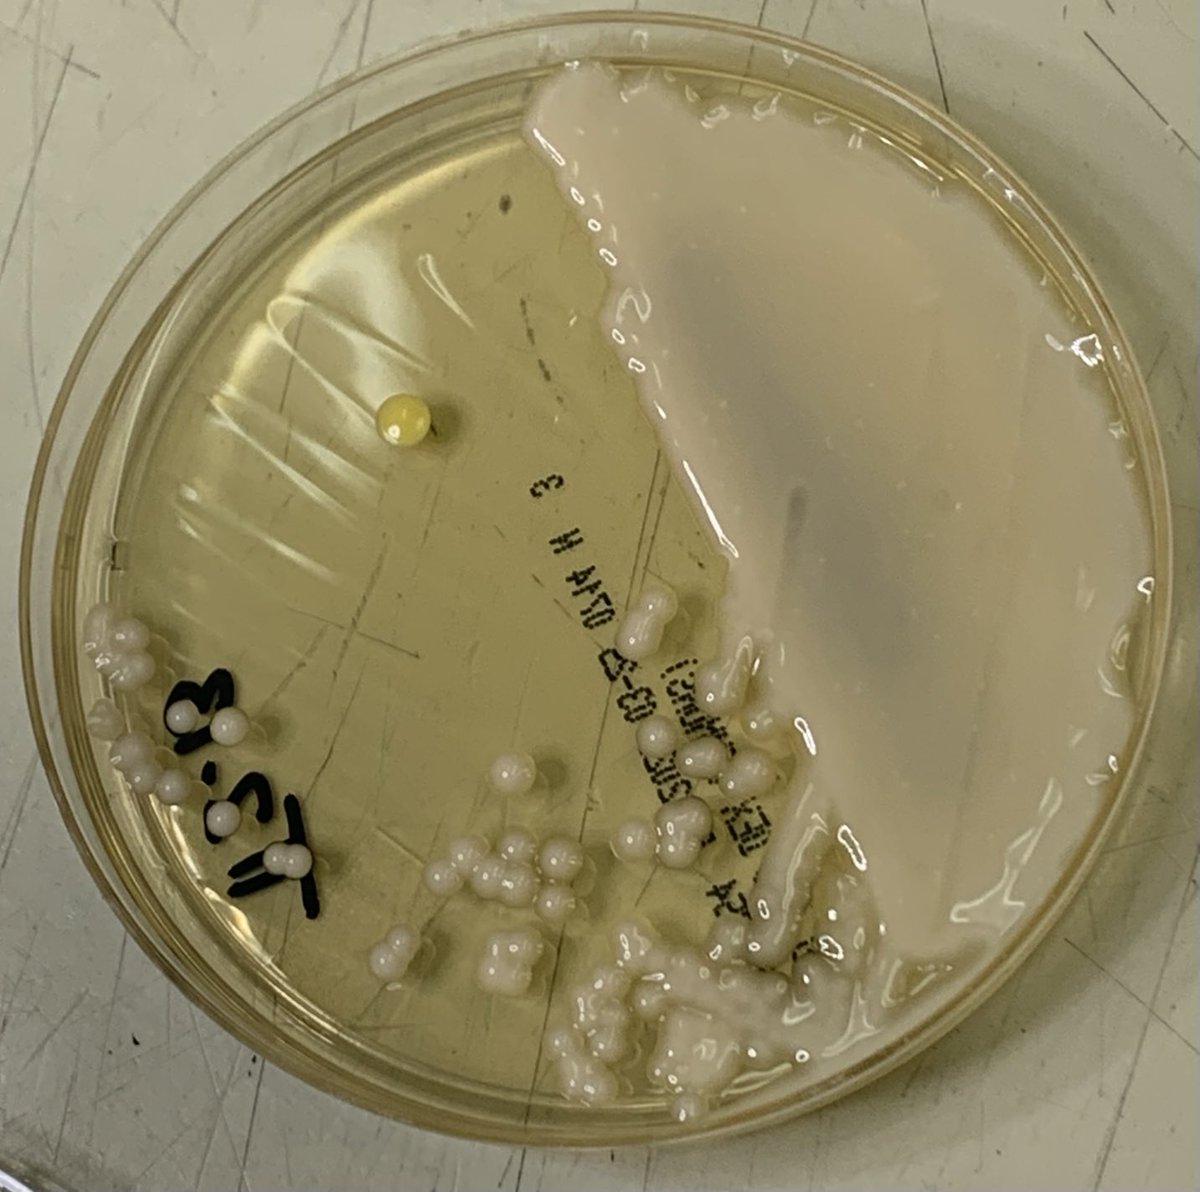 Micro/Path rounds #cryptococcus   BAL… nice capsule 🔬 creamy, mucoid colonies 🧫 #IDFellowship #microbiology #IDTwitter